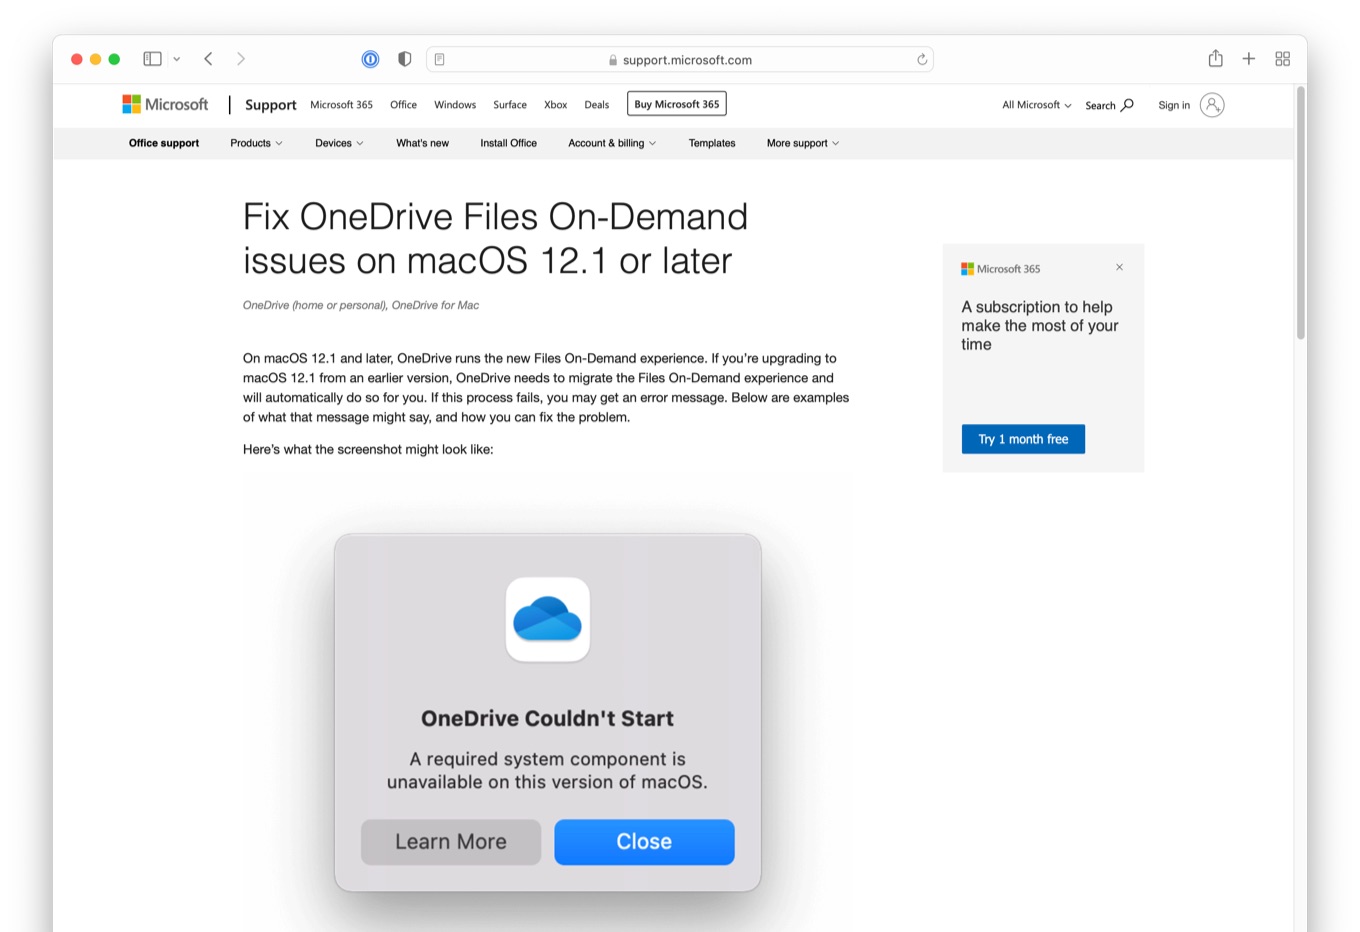 How to Fix OneDrive Files On-Demand issues on macOS 12.1 Monterey